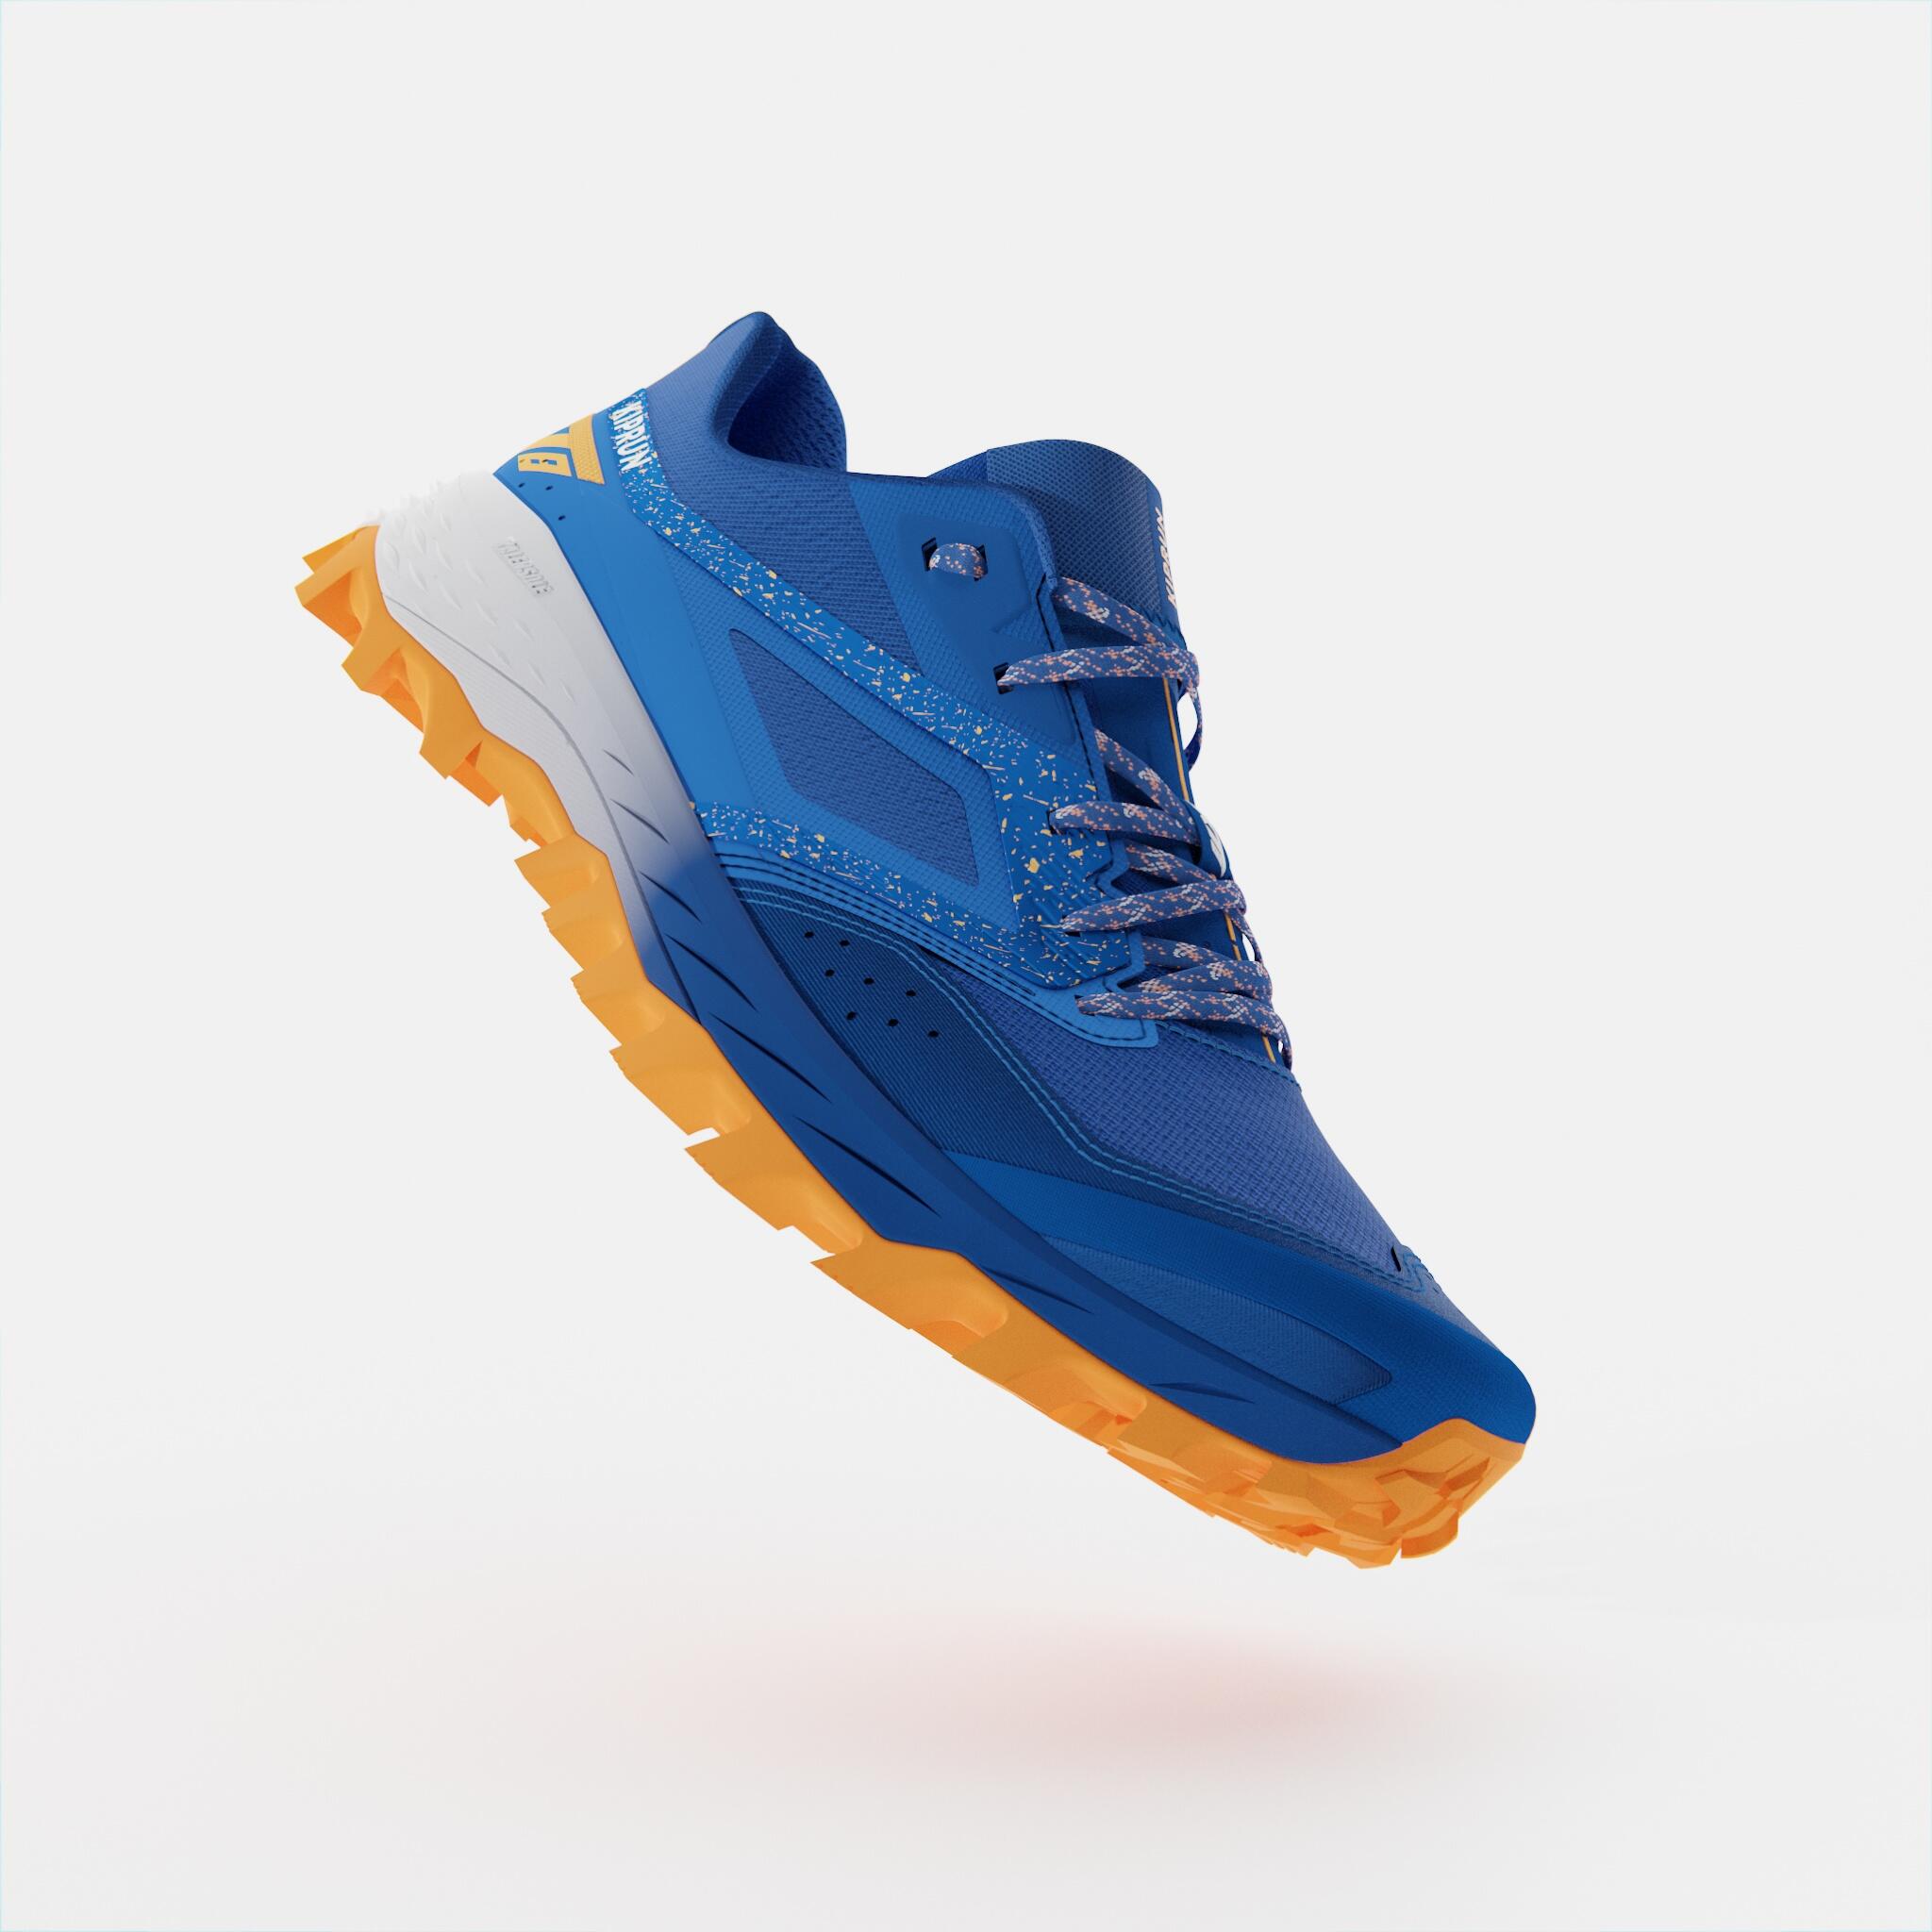 XT8 men's trail running shoes blue and orange 3/16